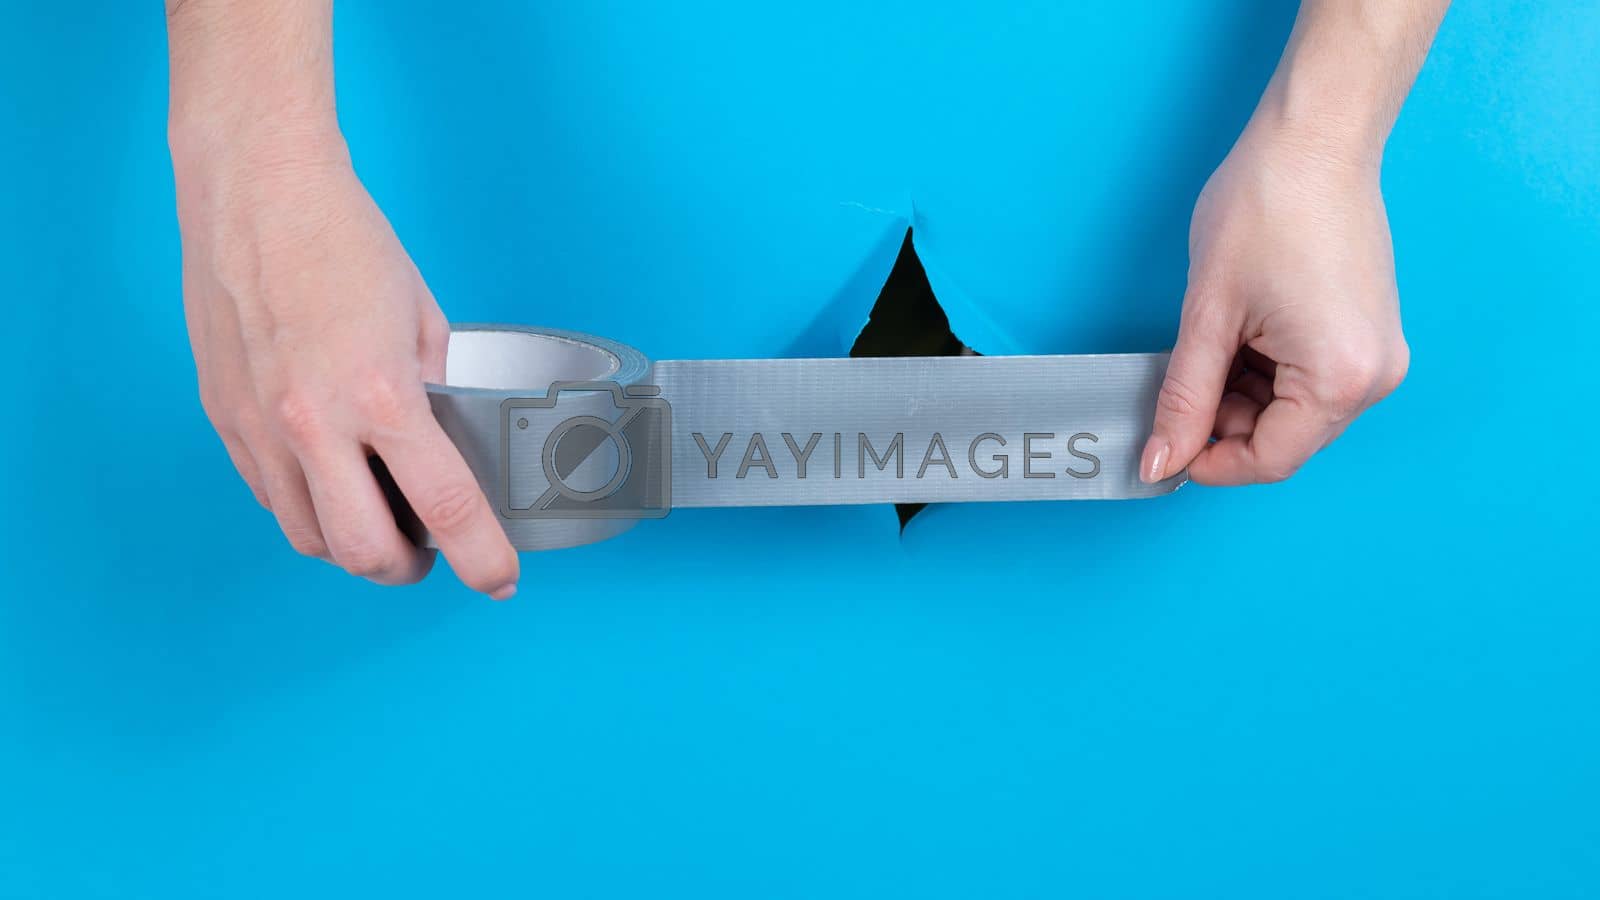 Royalty free image of Woman sticking silver tape on a hole on a blue background.  by mrwed54